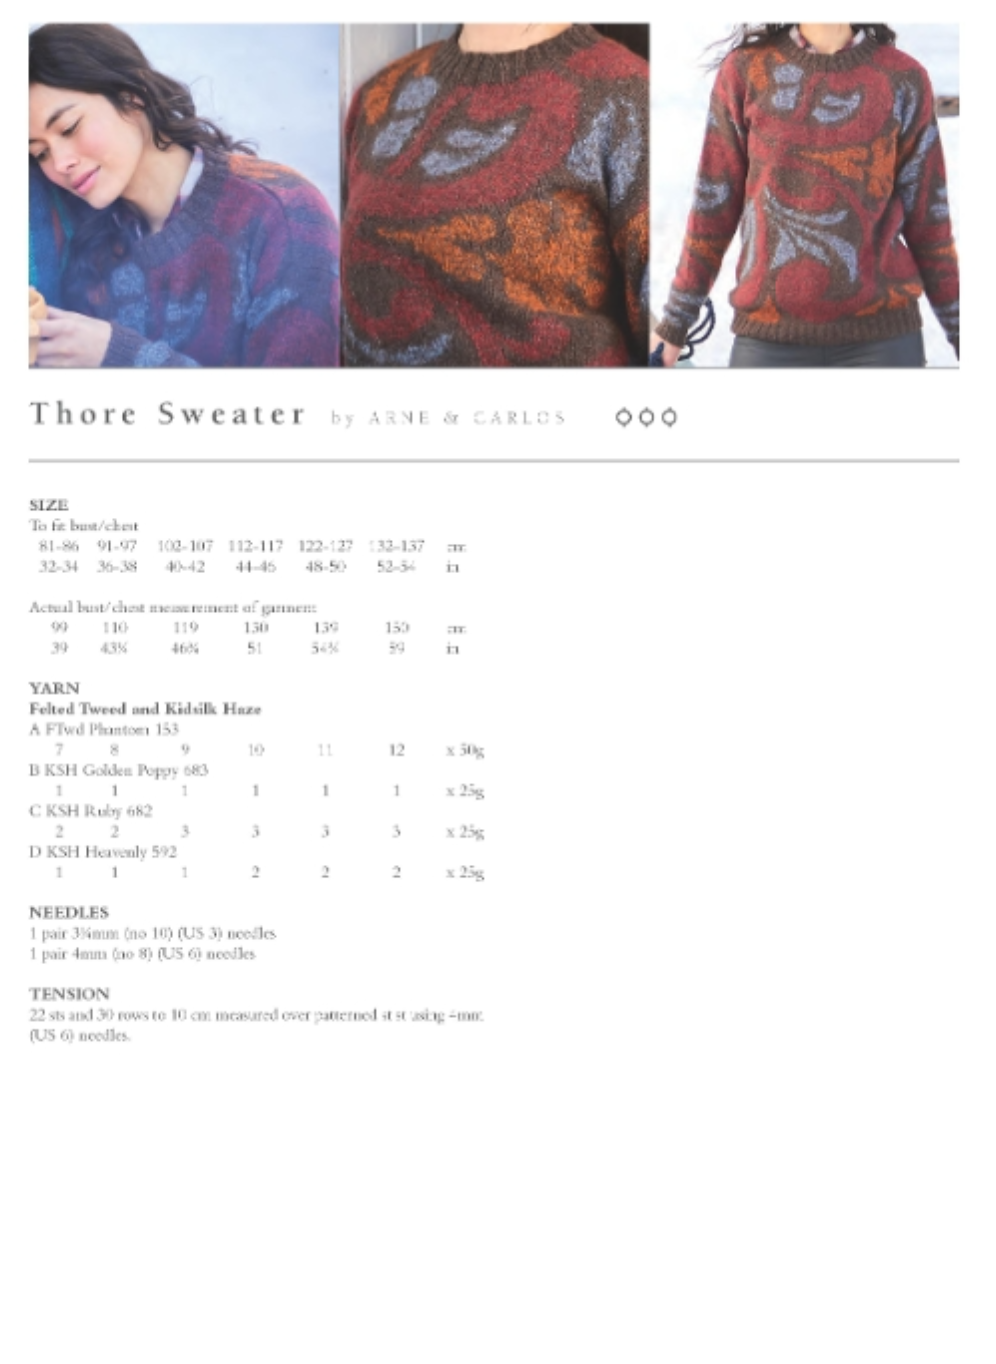 Thore sweater. In both deep purples and blues and also warm oranges, reds and browns. This pattern is for an abstract sweater with nordic designs across the whole sweater.